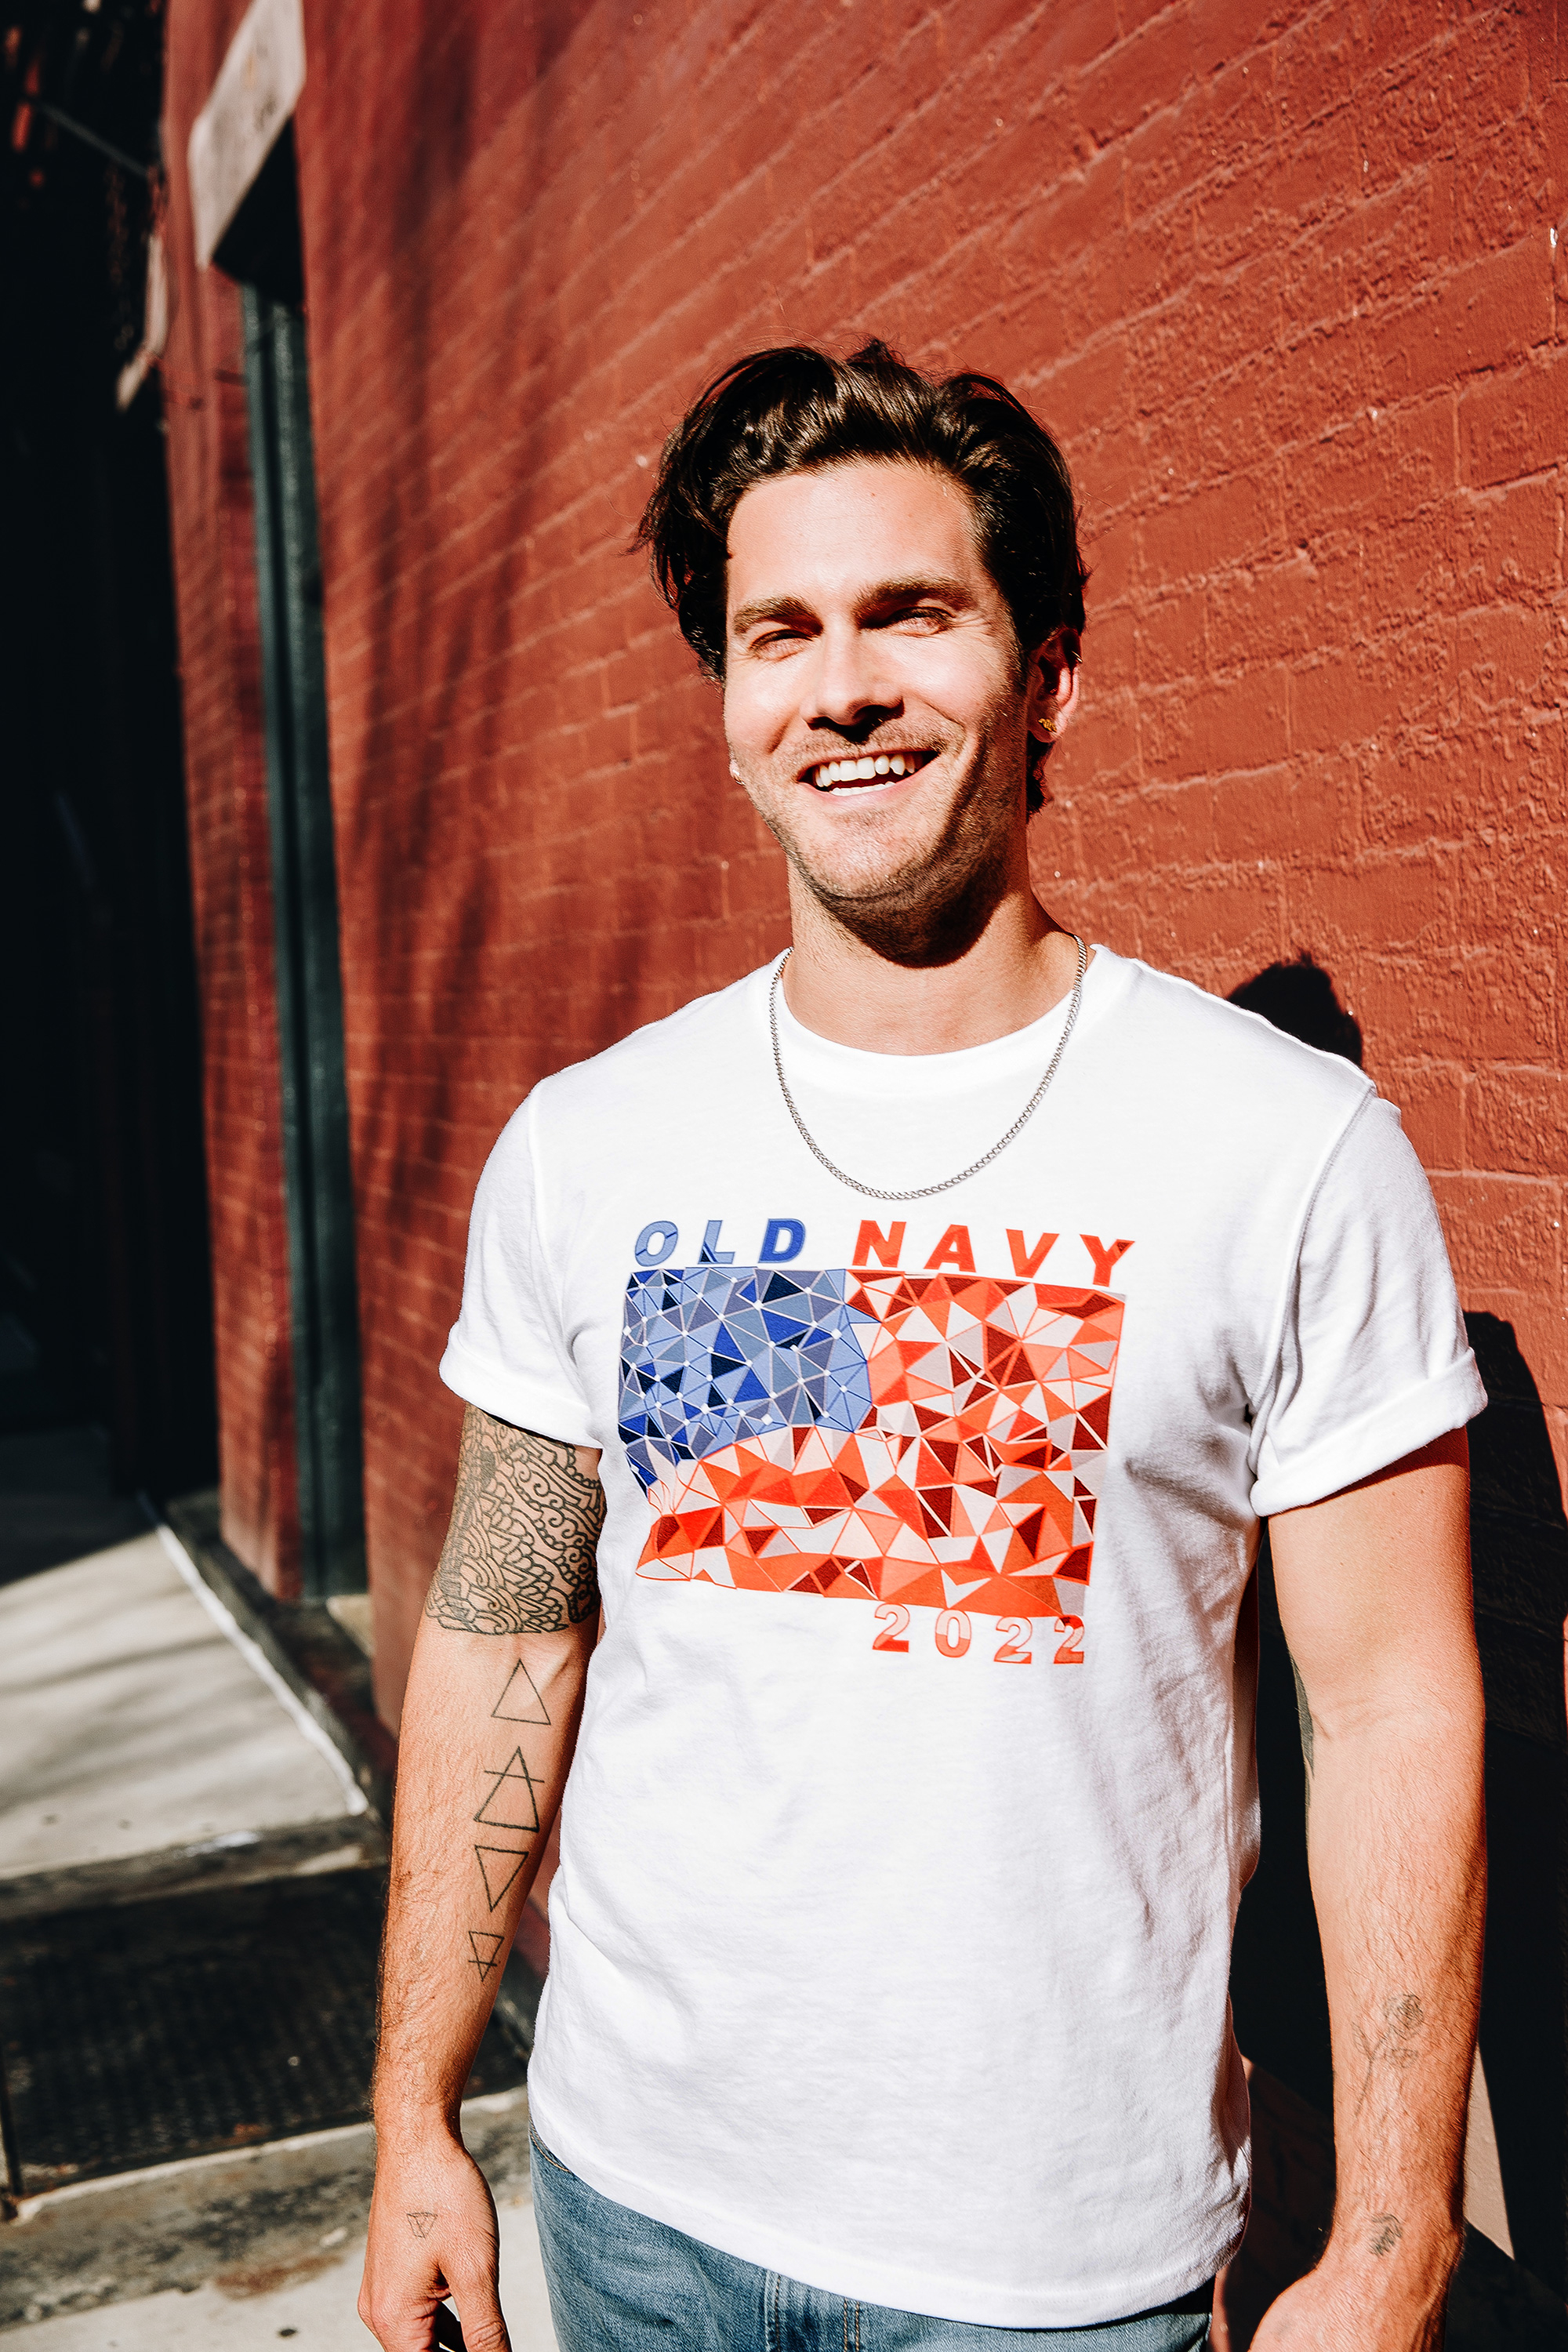 Old Navy, Tops, Old Navy 4th Of July Shirt